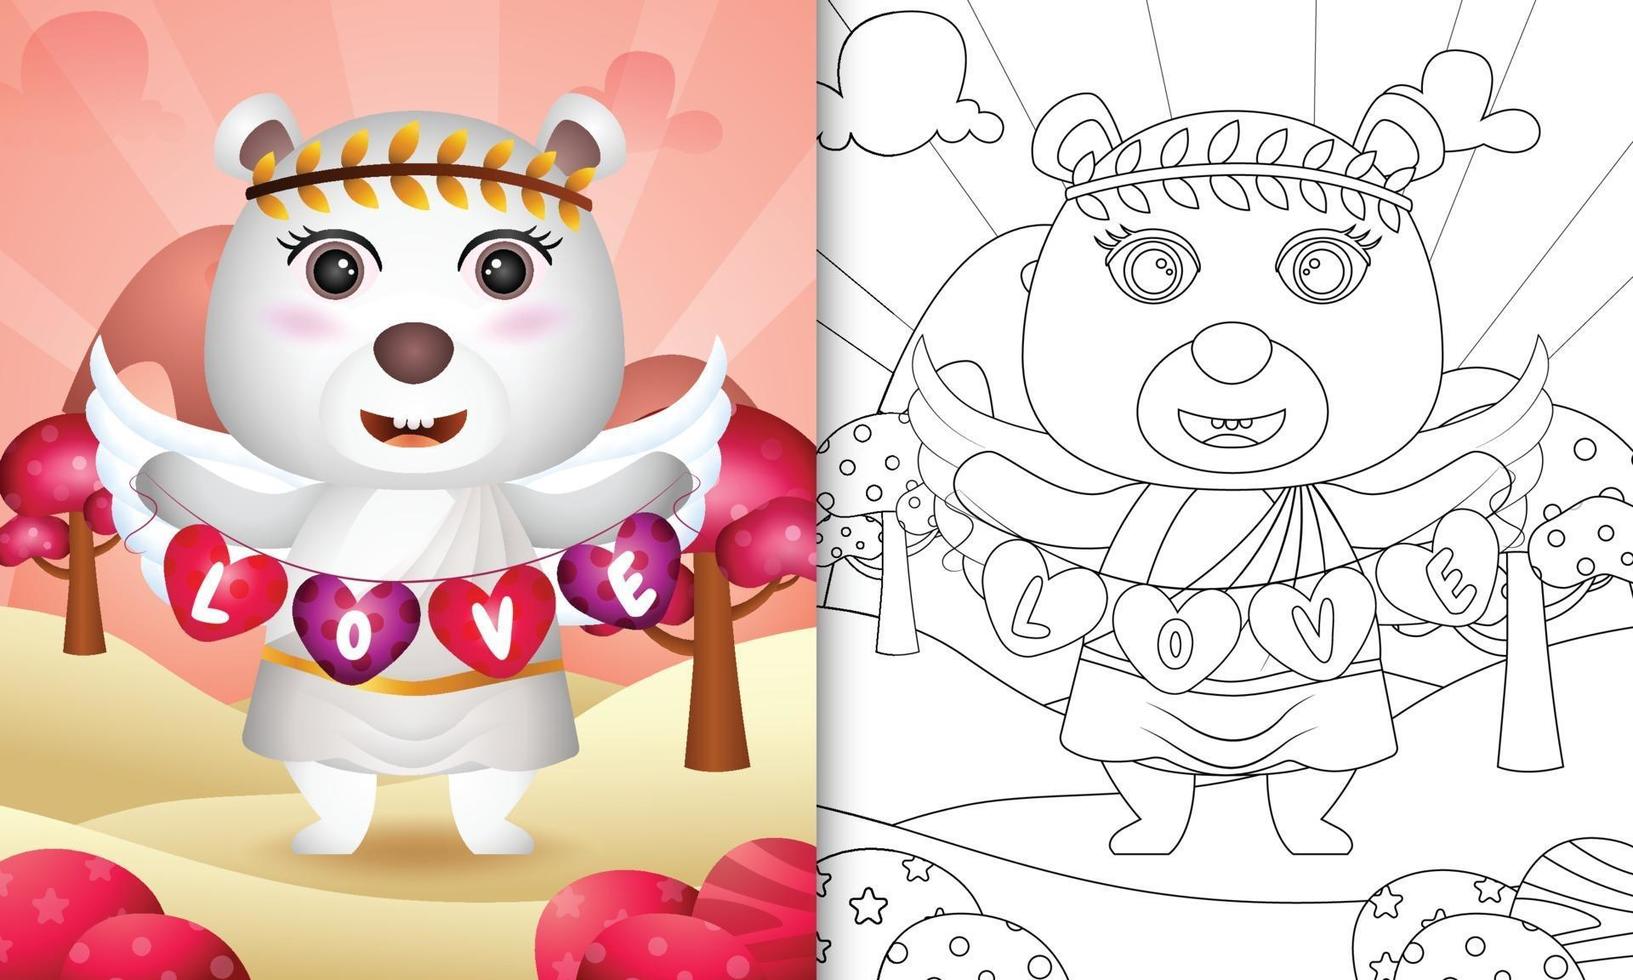 coloring book for kids with a cute polar bear angel using cupid costume holding heart shape flag vector